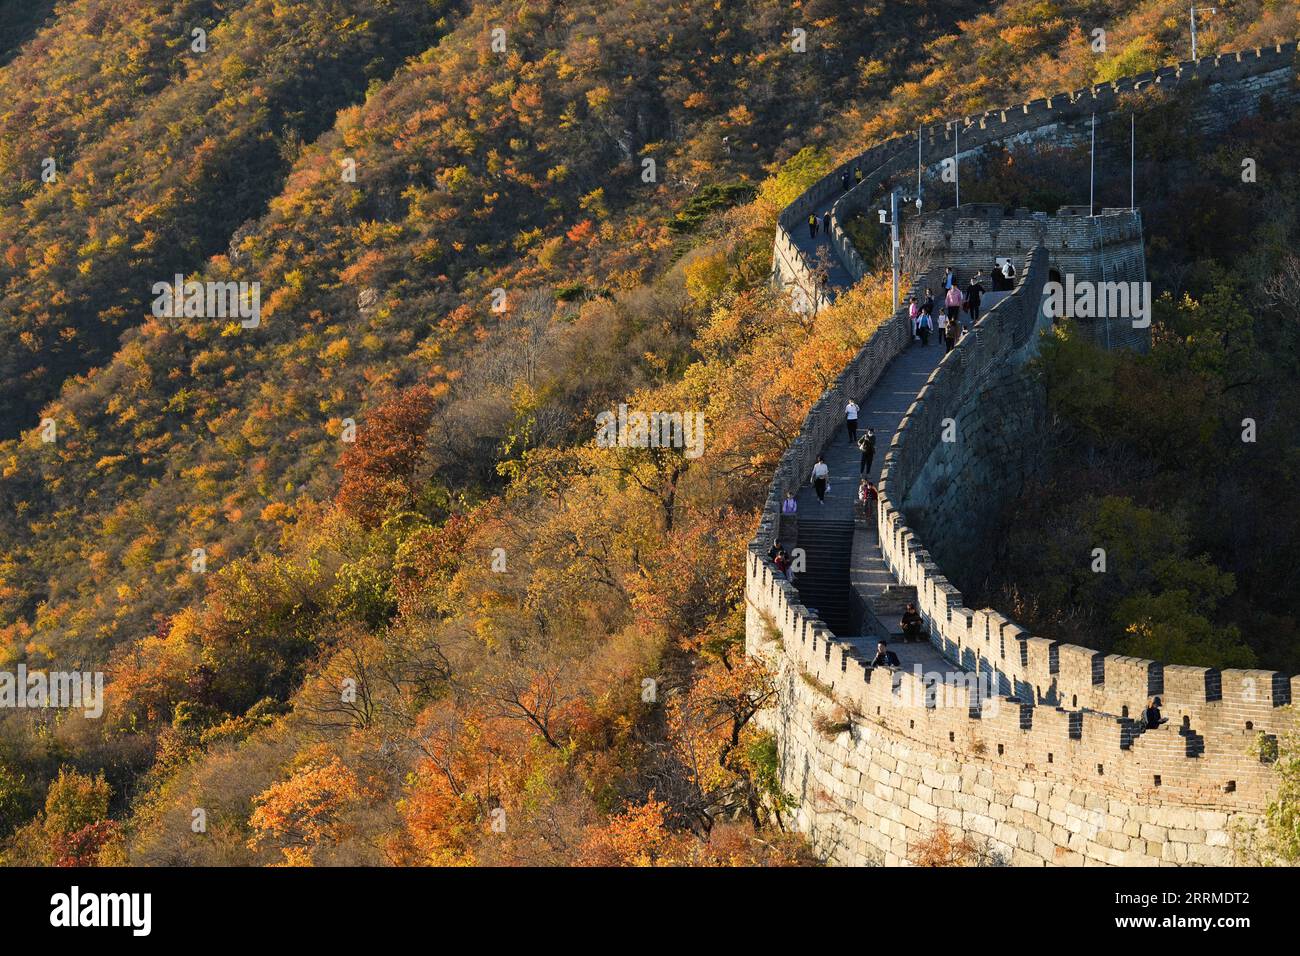 221023 -- BEIJING, Oct. 23, 2022 Xinhua -- Tourists visit the Mutianyu section of the Great Wall in Beijing, capital of China, Oct. 22, 2022. Xinhua/Ju Huanzong Beijing CHINA Weather & Environment conservation & Disasters & Accidents xx *** 221023 BEIJING, Oct 23, 2022 Xinhua Tourists visit the Mutianyu section of the Great Wall in Beijing, capital of China, Oct 22, 2022 Xinhua Ju Huanzong Beijing CHINA Weather Environment conservation Disasters Accidents xx, PUBLICATIONxNOTxINxDENxNORxSWExFIN Copyright: xJuxHuanzongx CHINA-BEIJING-GREAT WALL-MUTIANYU CN Stock Photo